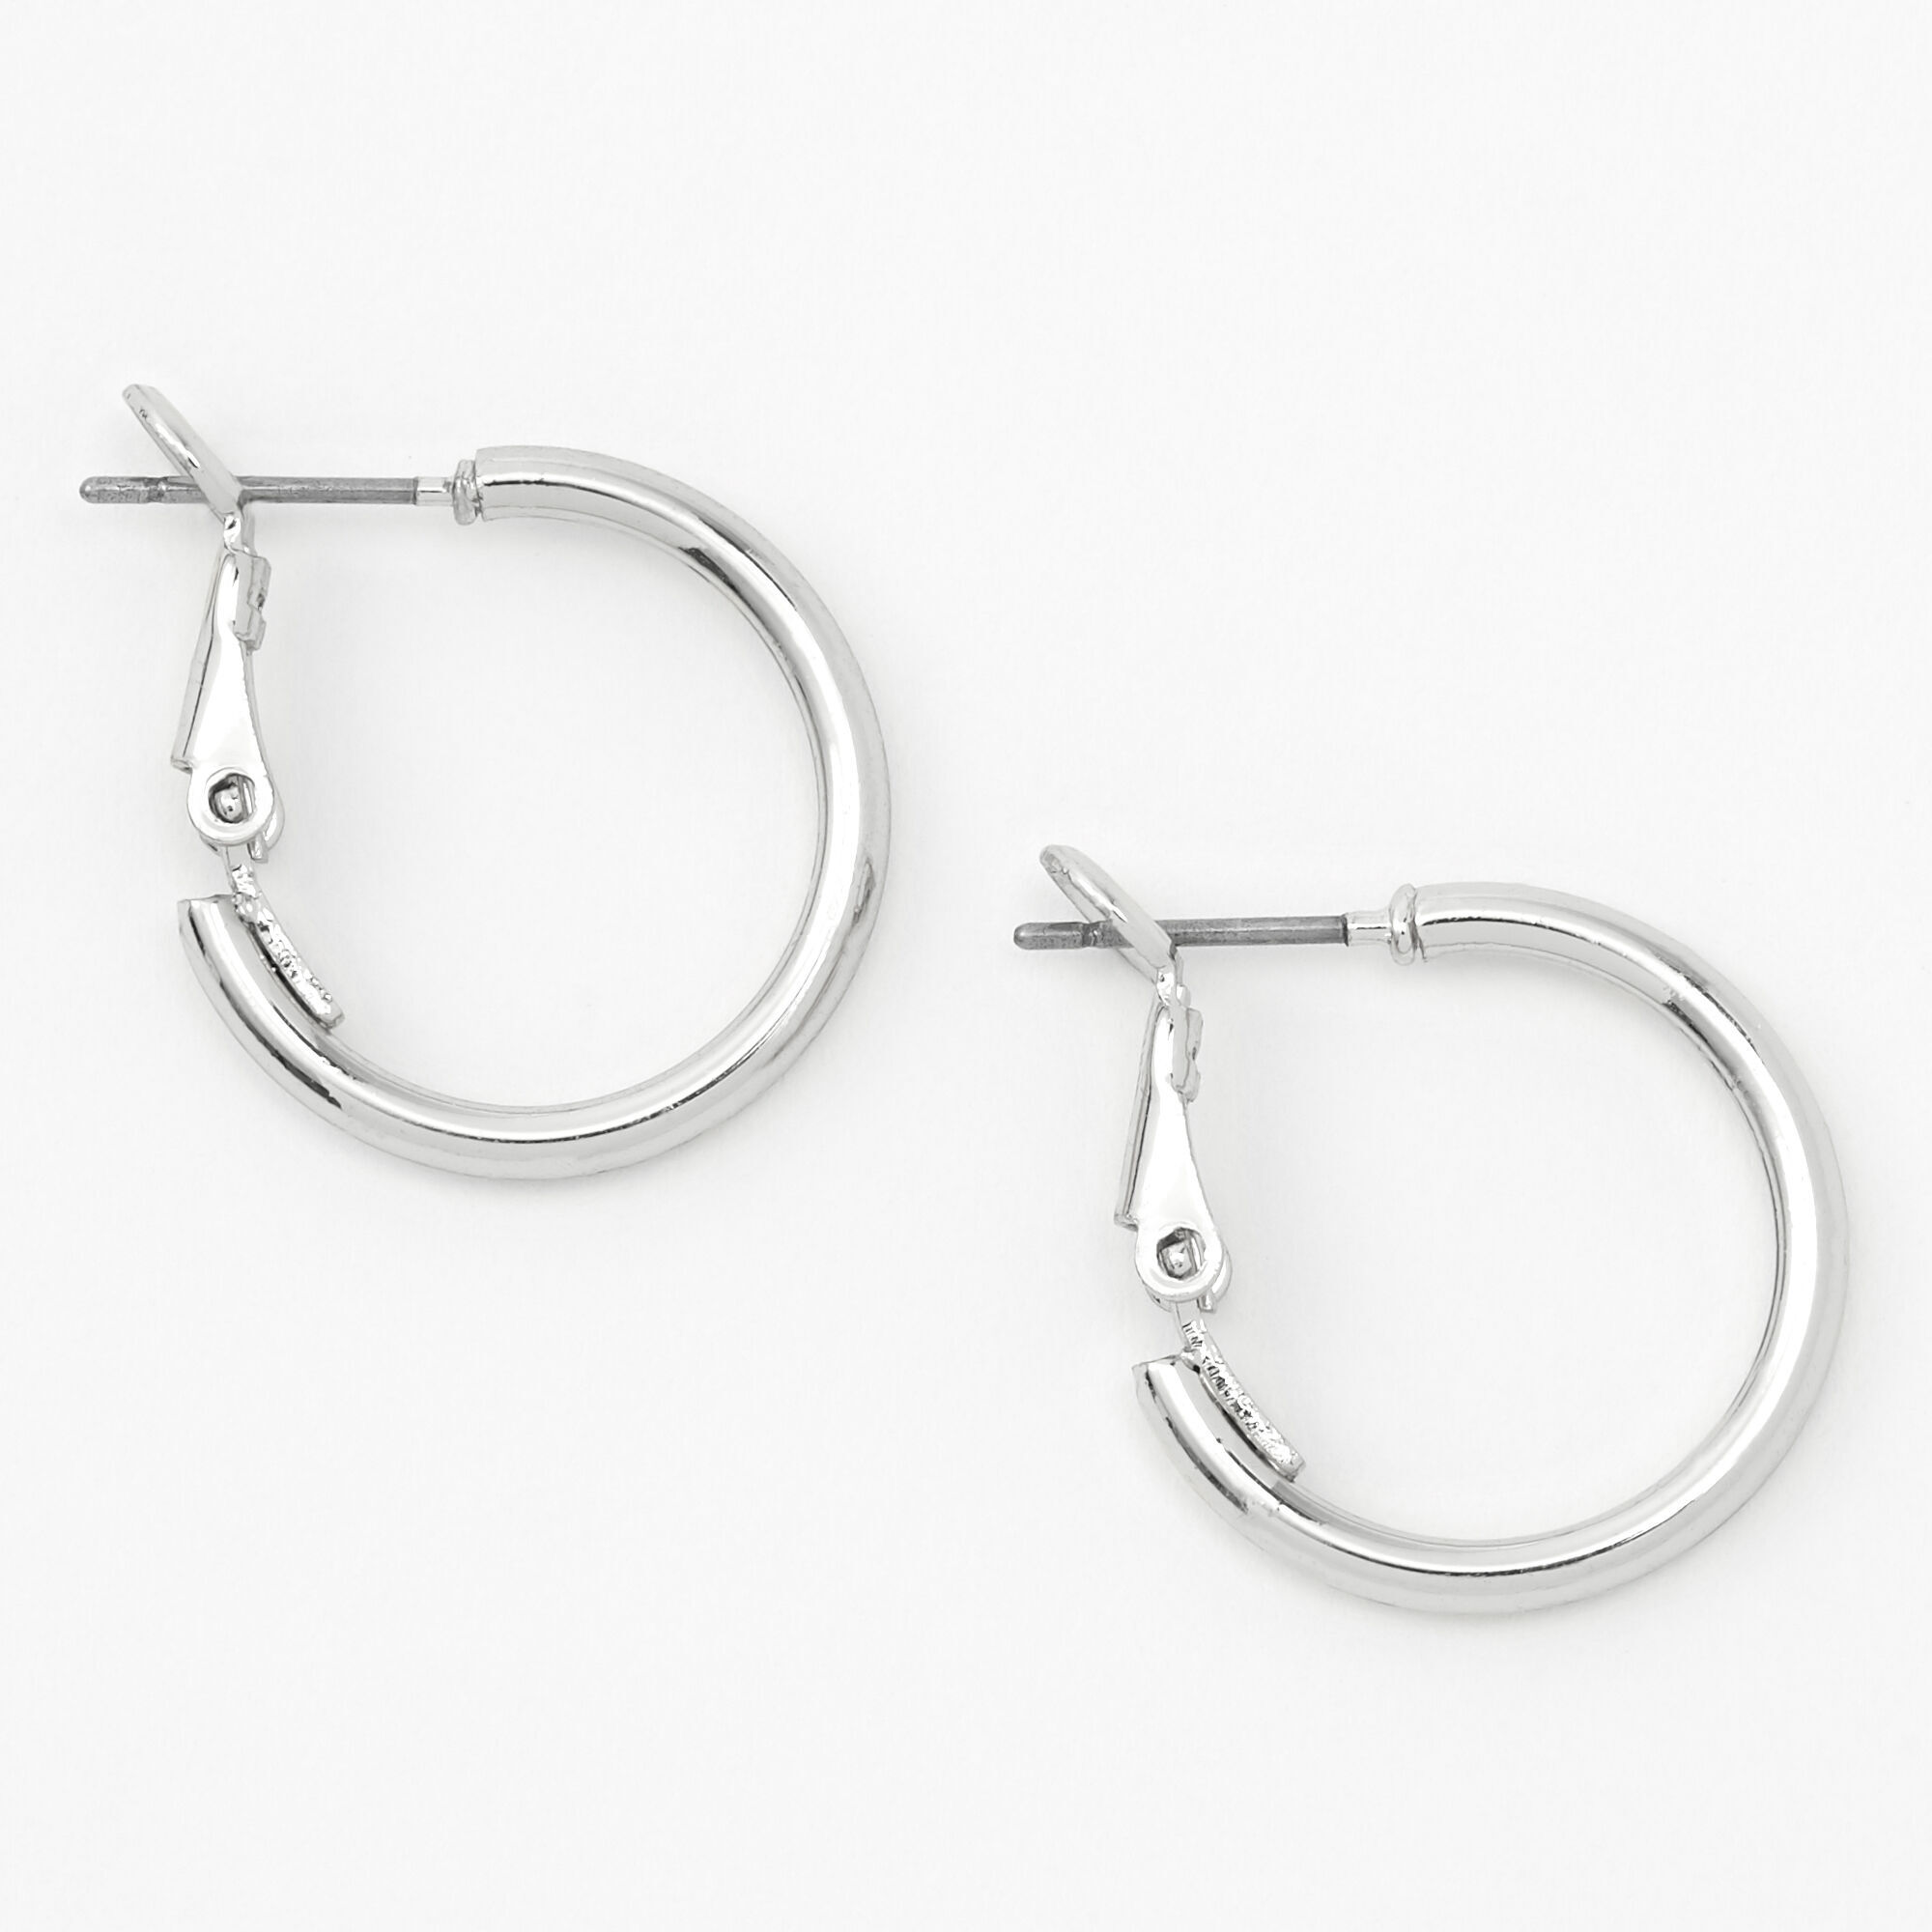 View Claires Tone 20MM Tube Hoop Earrings Silver information